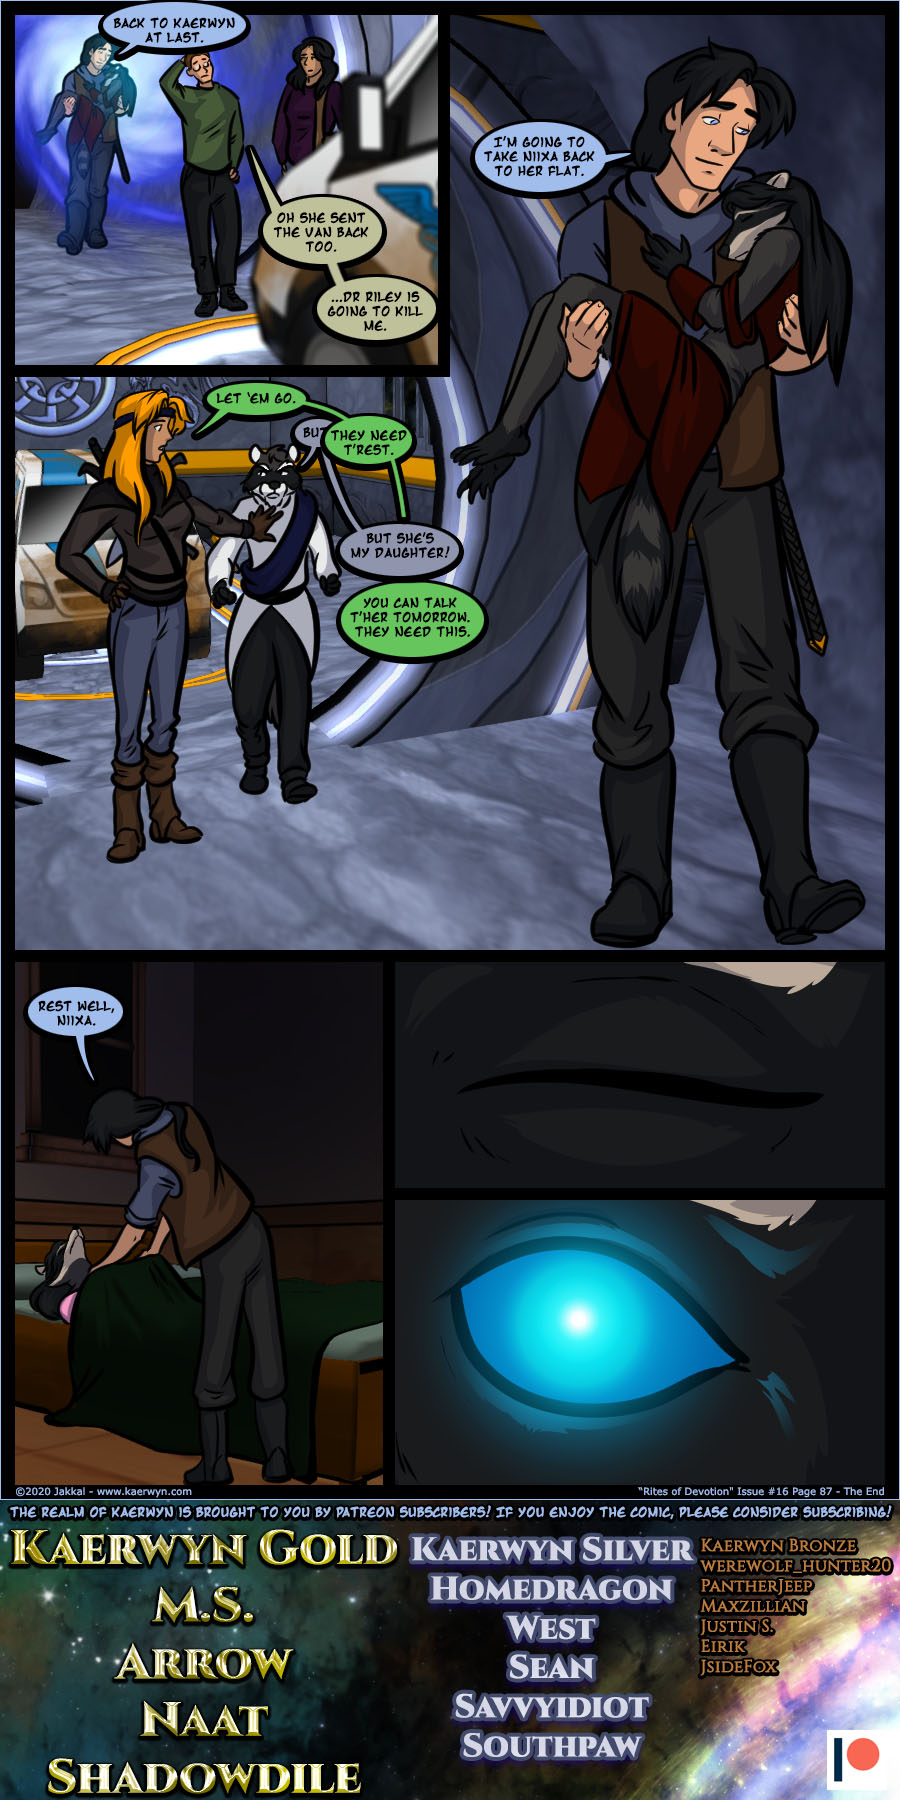 Issue 16 Page 87 - The End